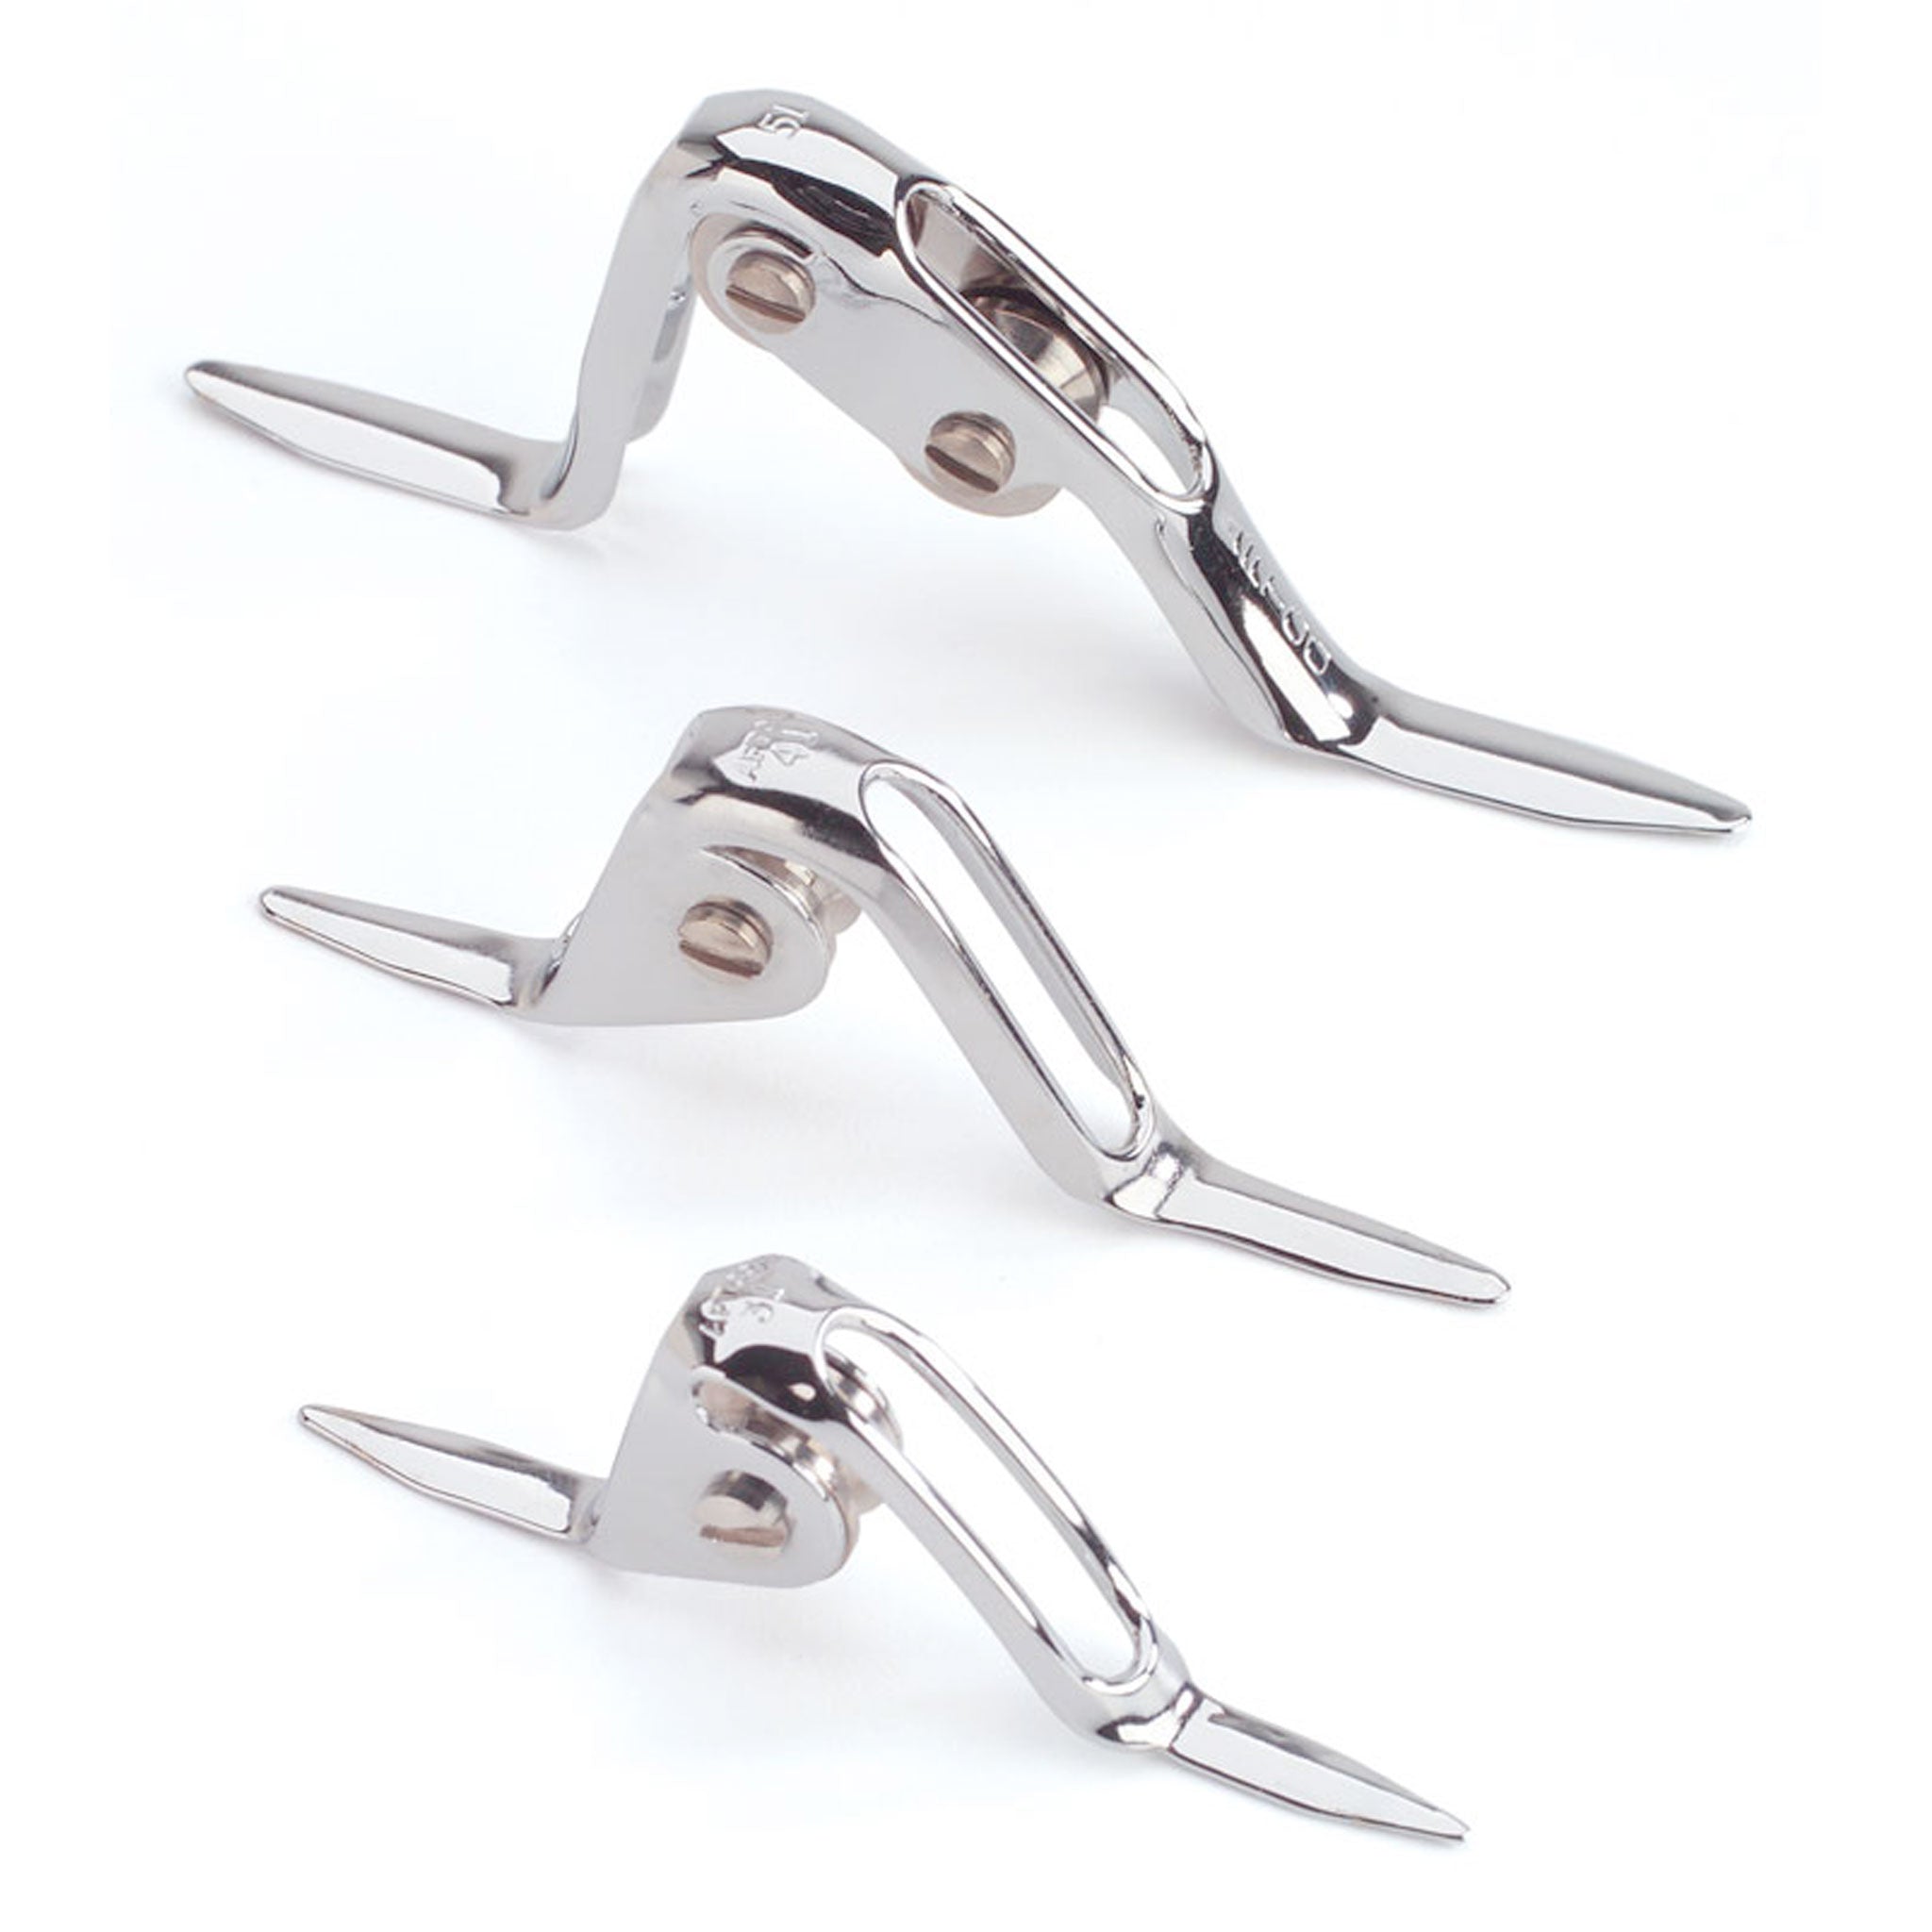 AFTCO Heavy Duty Roller Guides